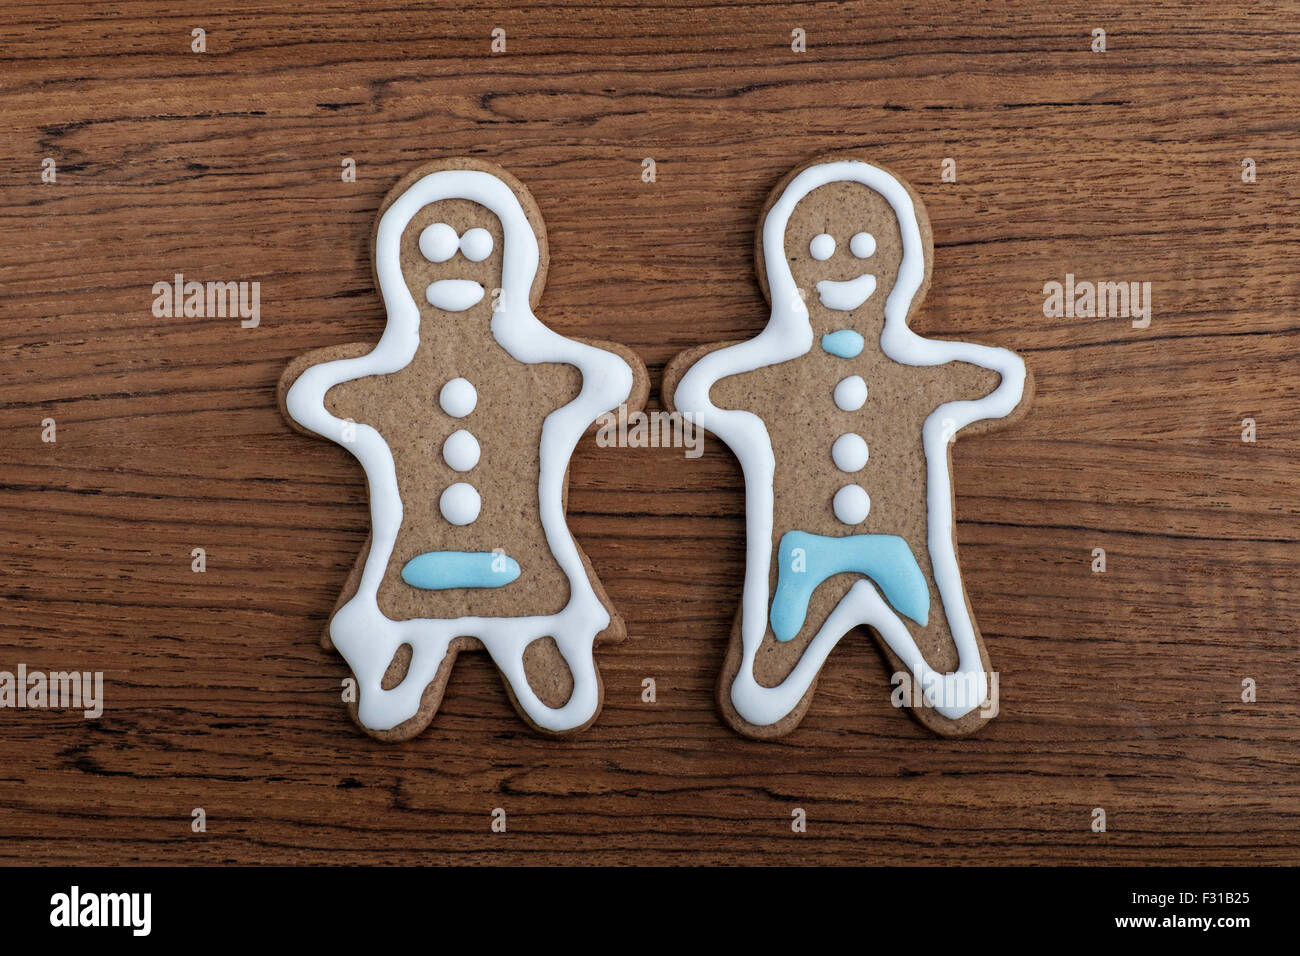 Gingerbread man and woman on a wooden background Banque D'Images